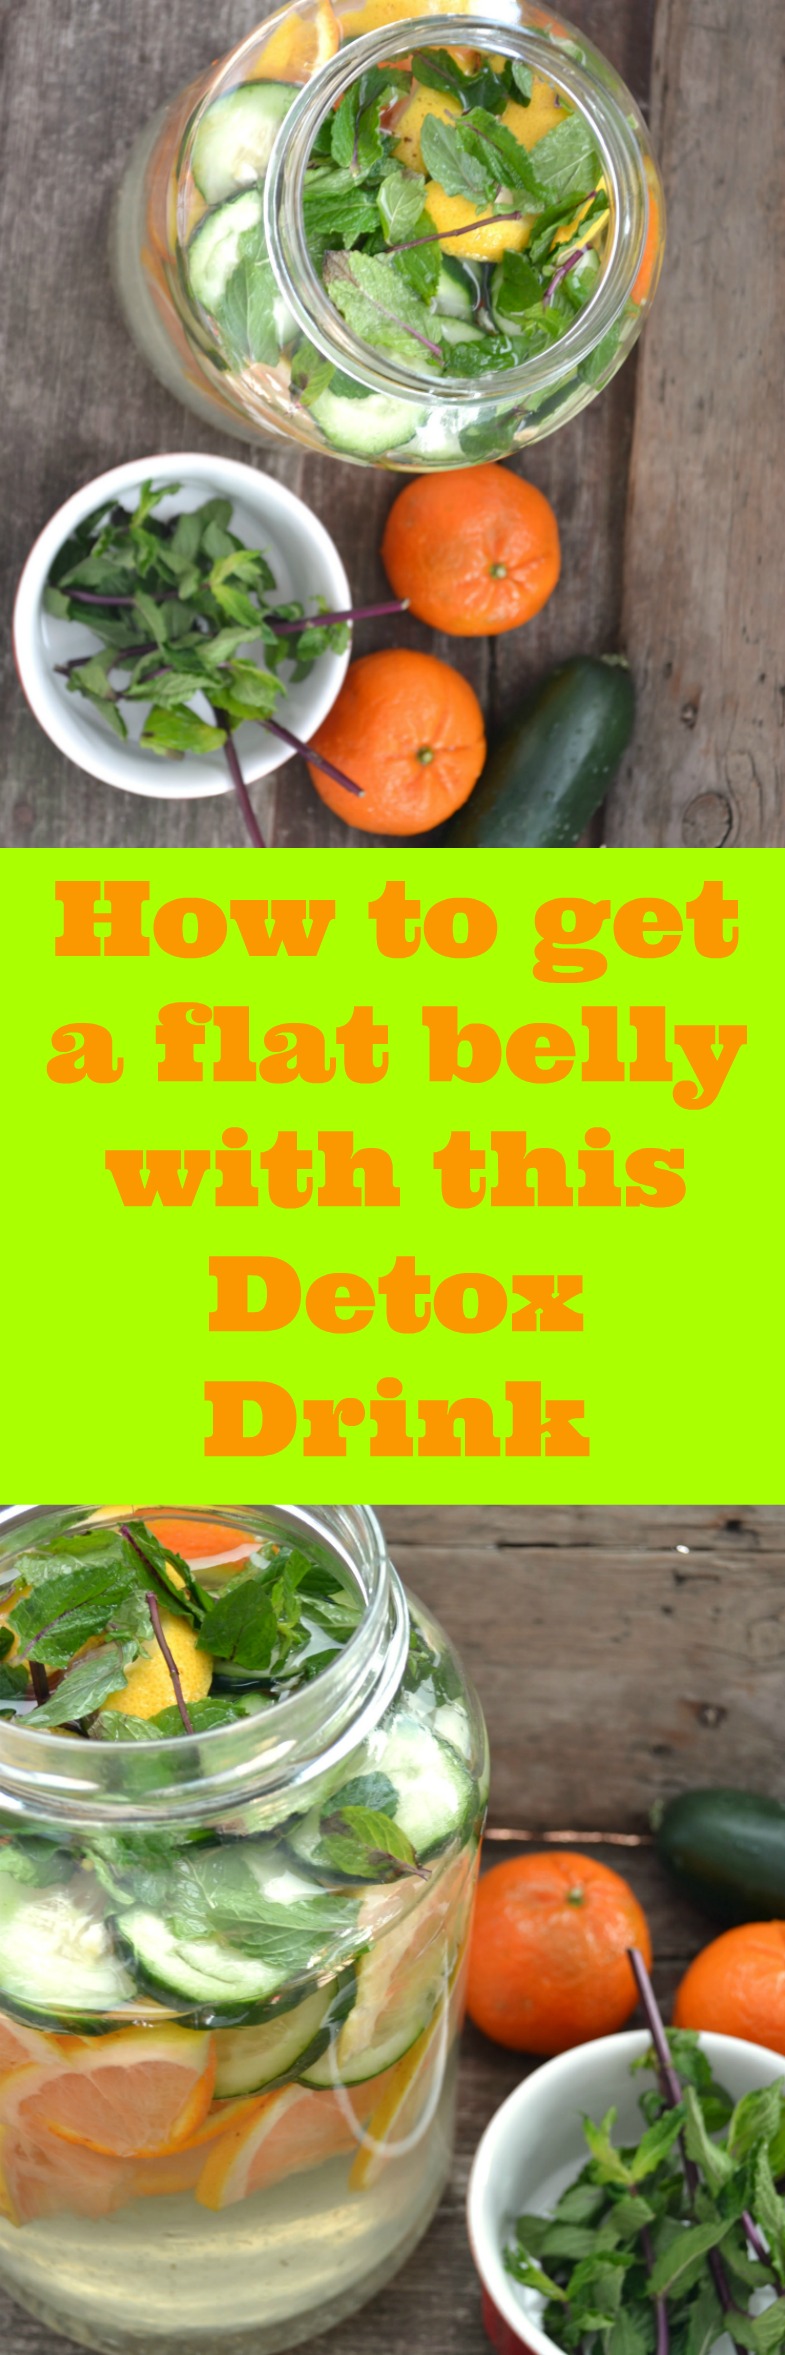 Drink this detox drink for weightloss. How to get a flat belly in one week plus lose weight. Especially for women with a bloated stomach. Get rid of that muffin top for good.